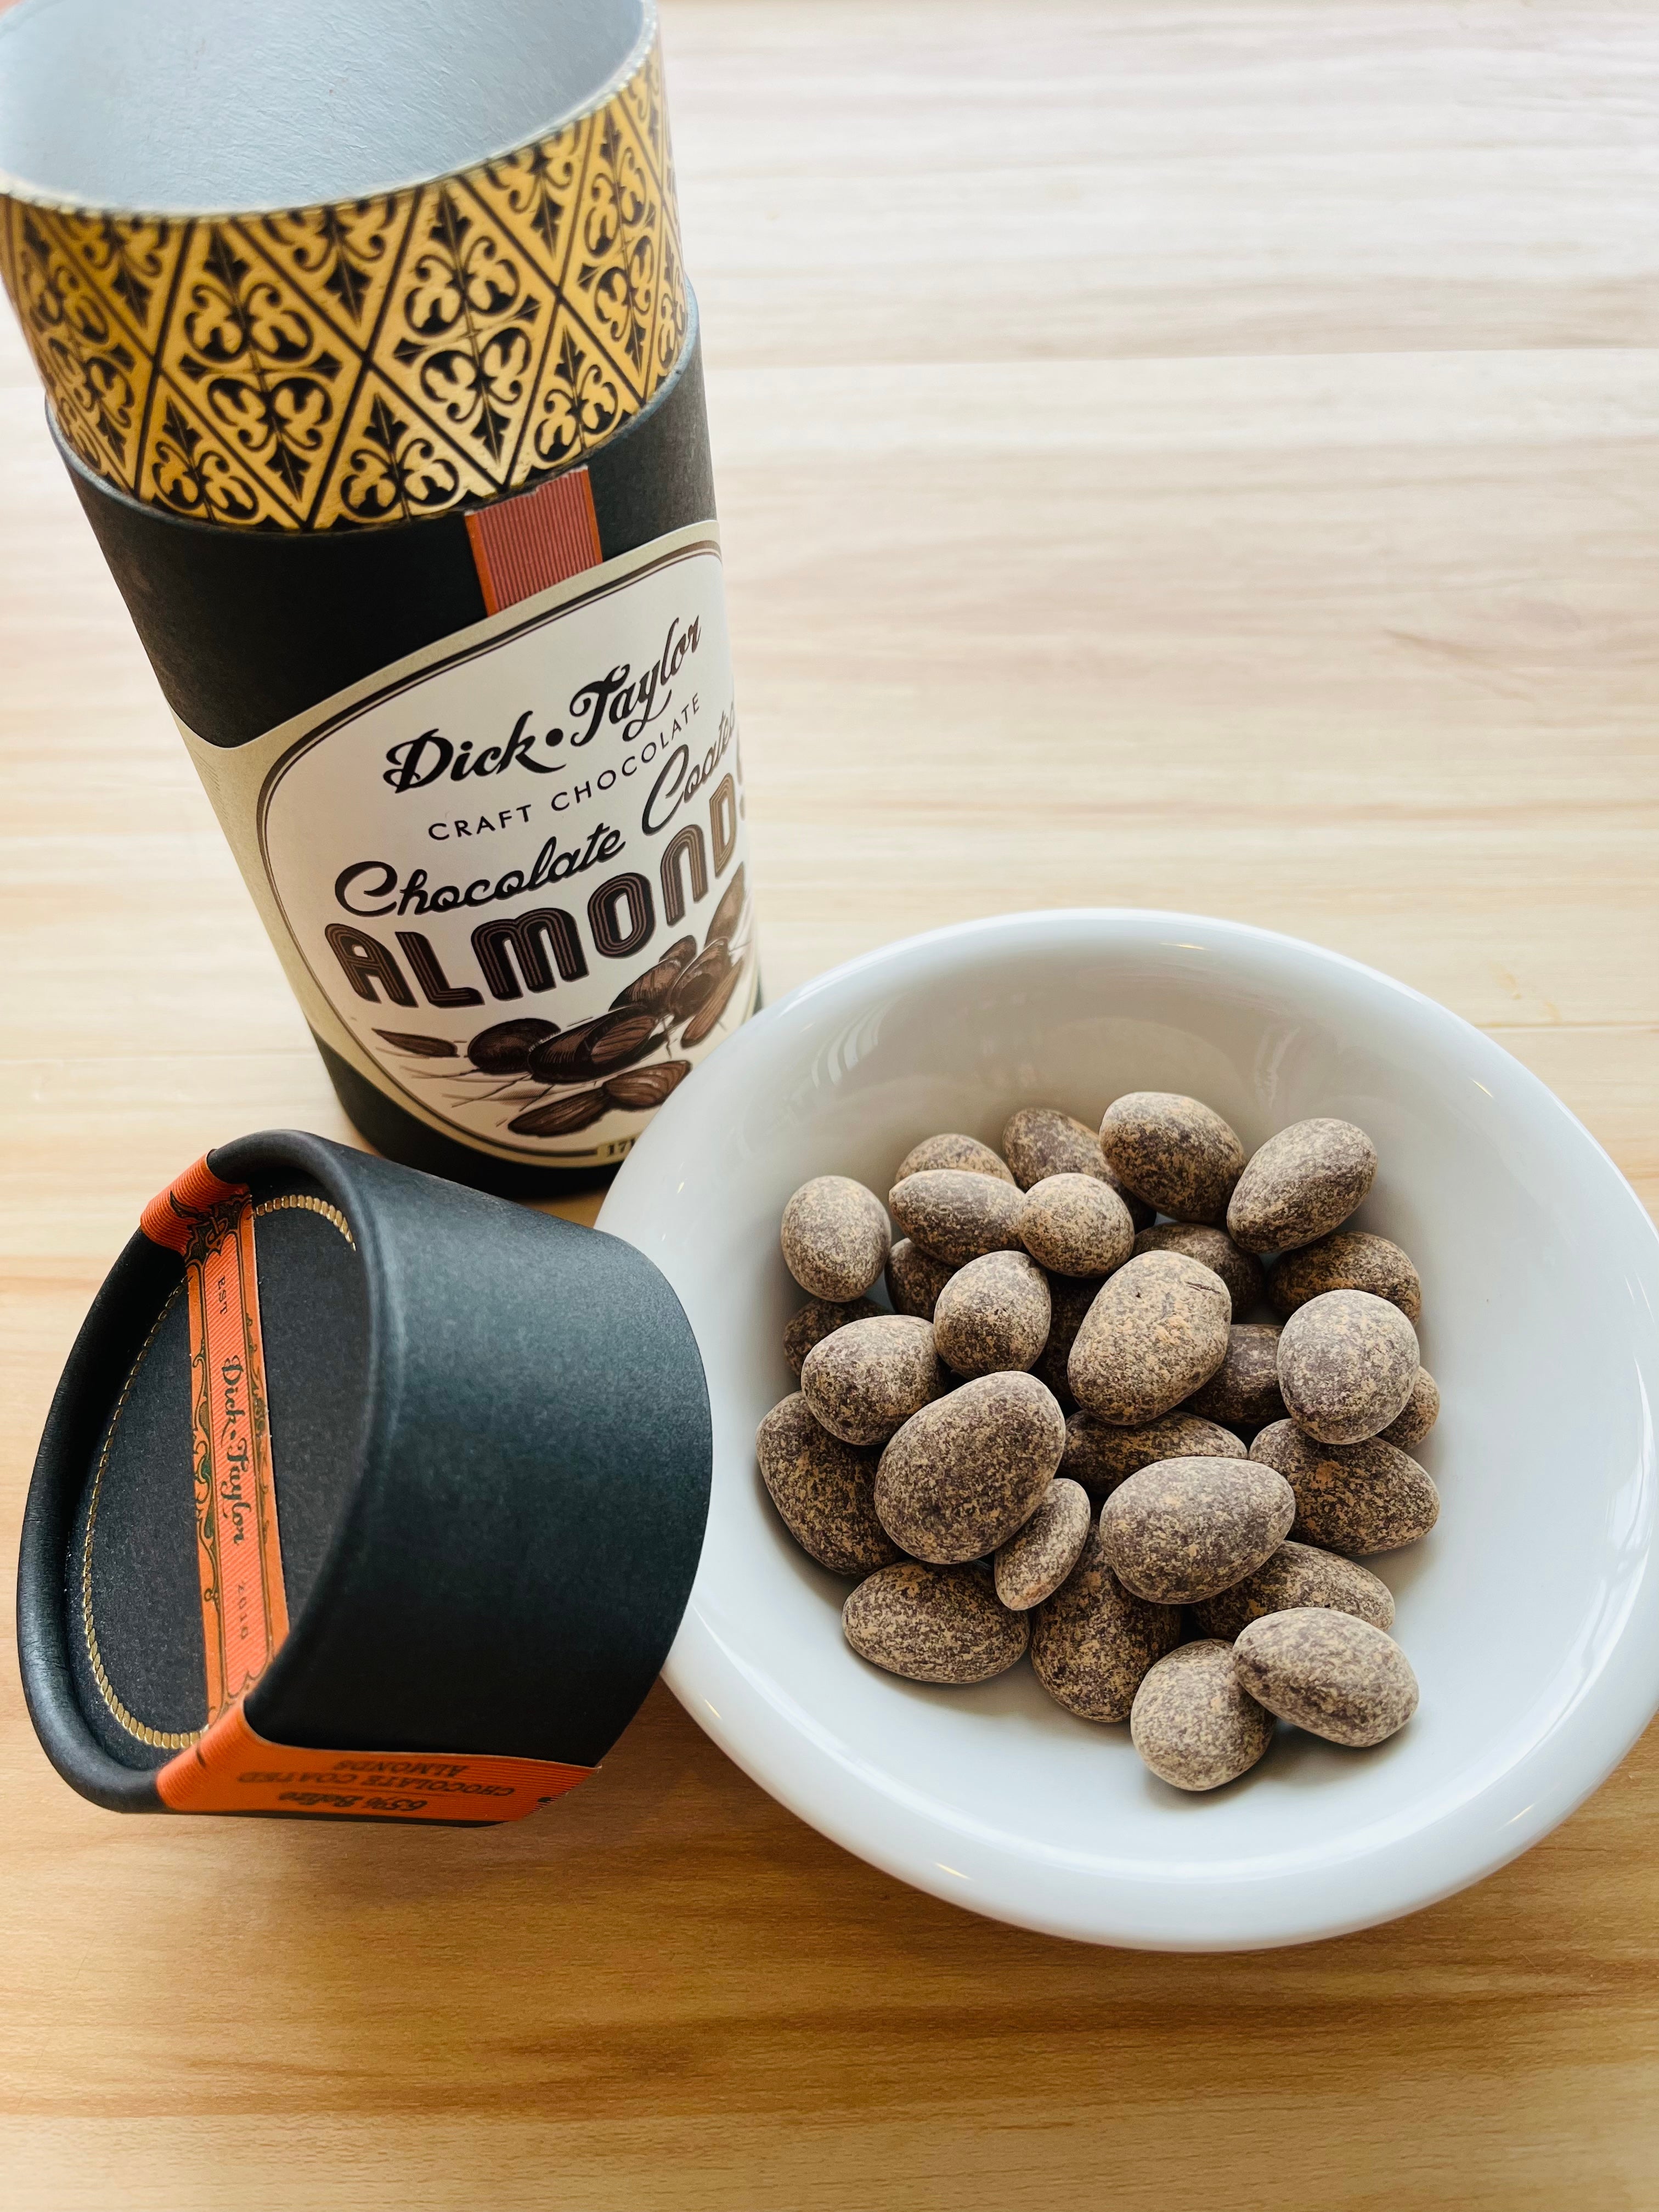 Chocolate Coated Almonds from Dick Taylor Craft Chocolate